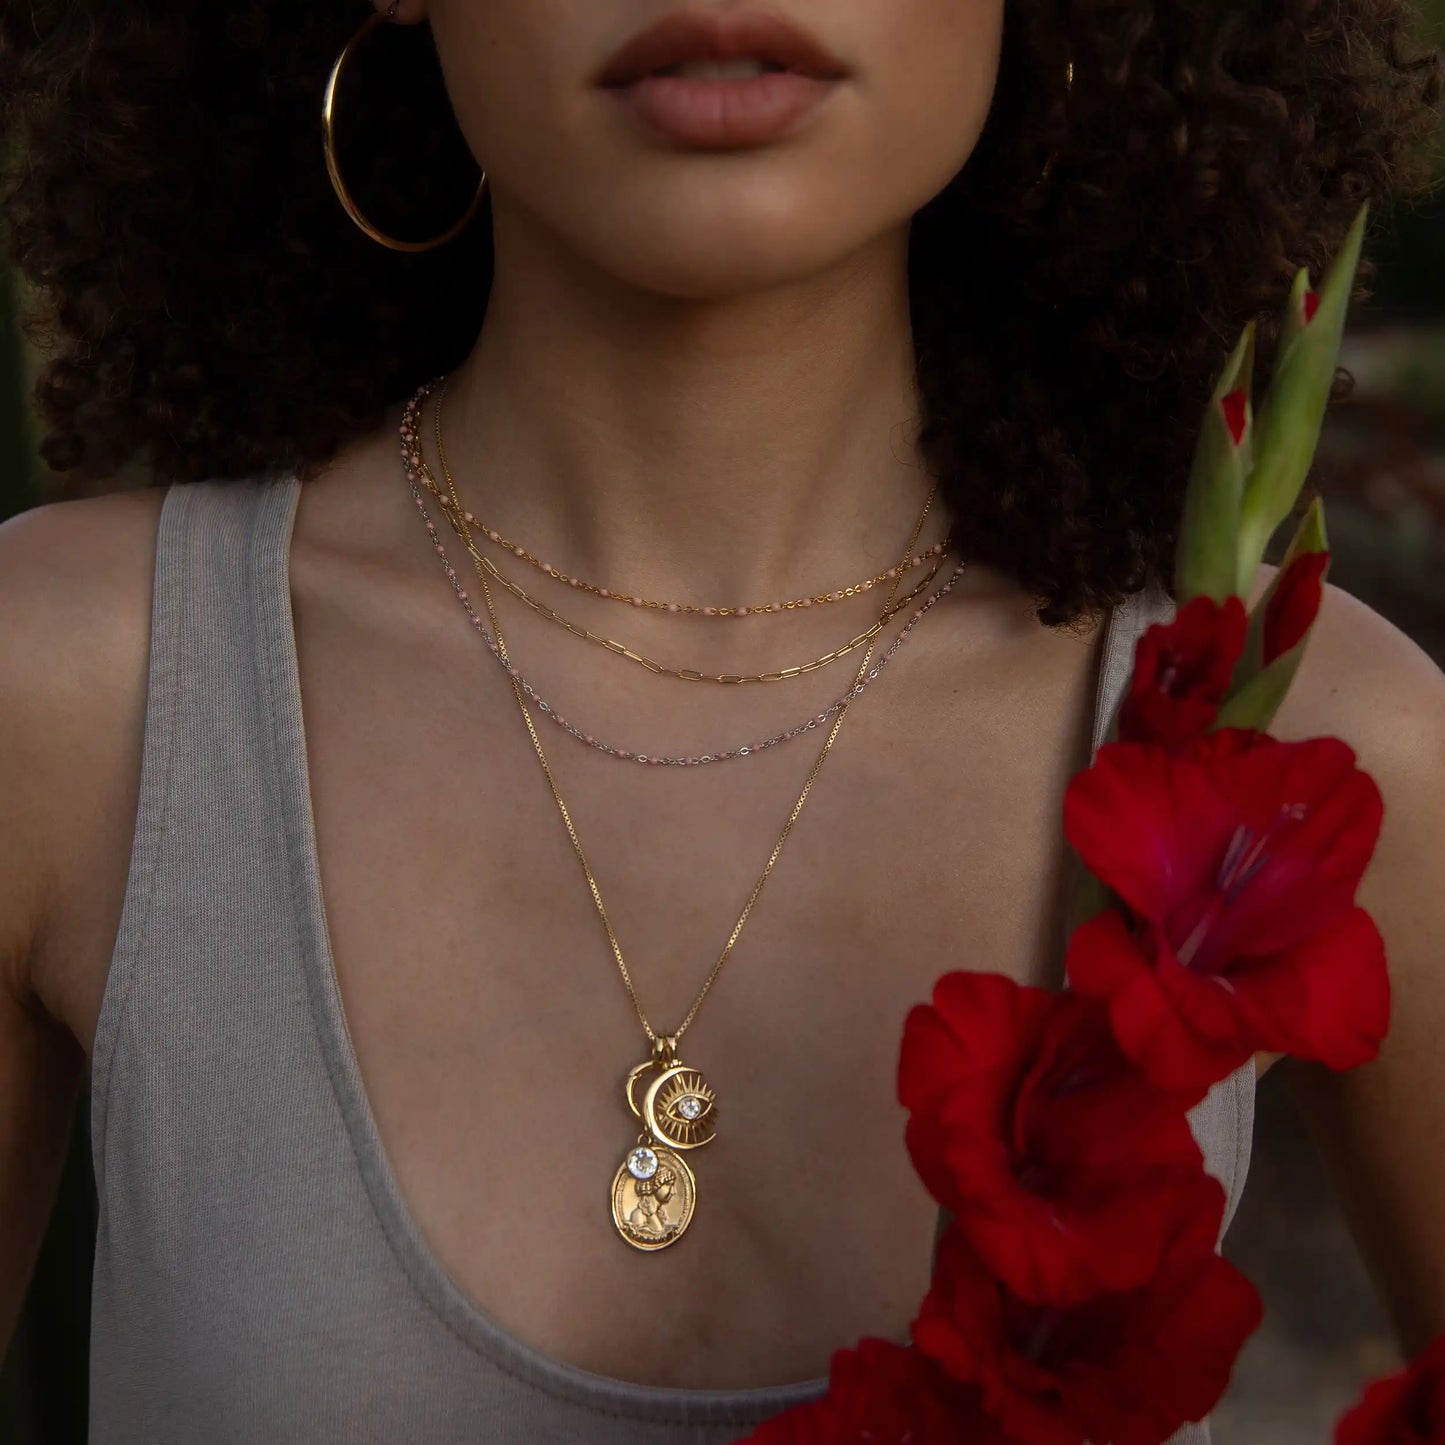 Sappho Necklace by Awe Inspired